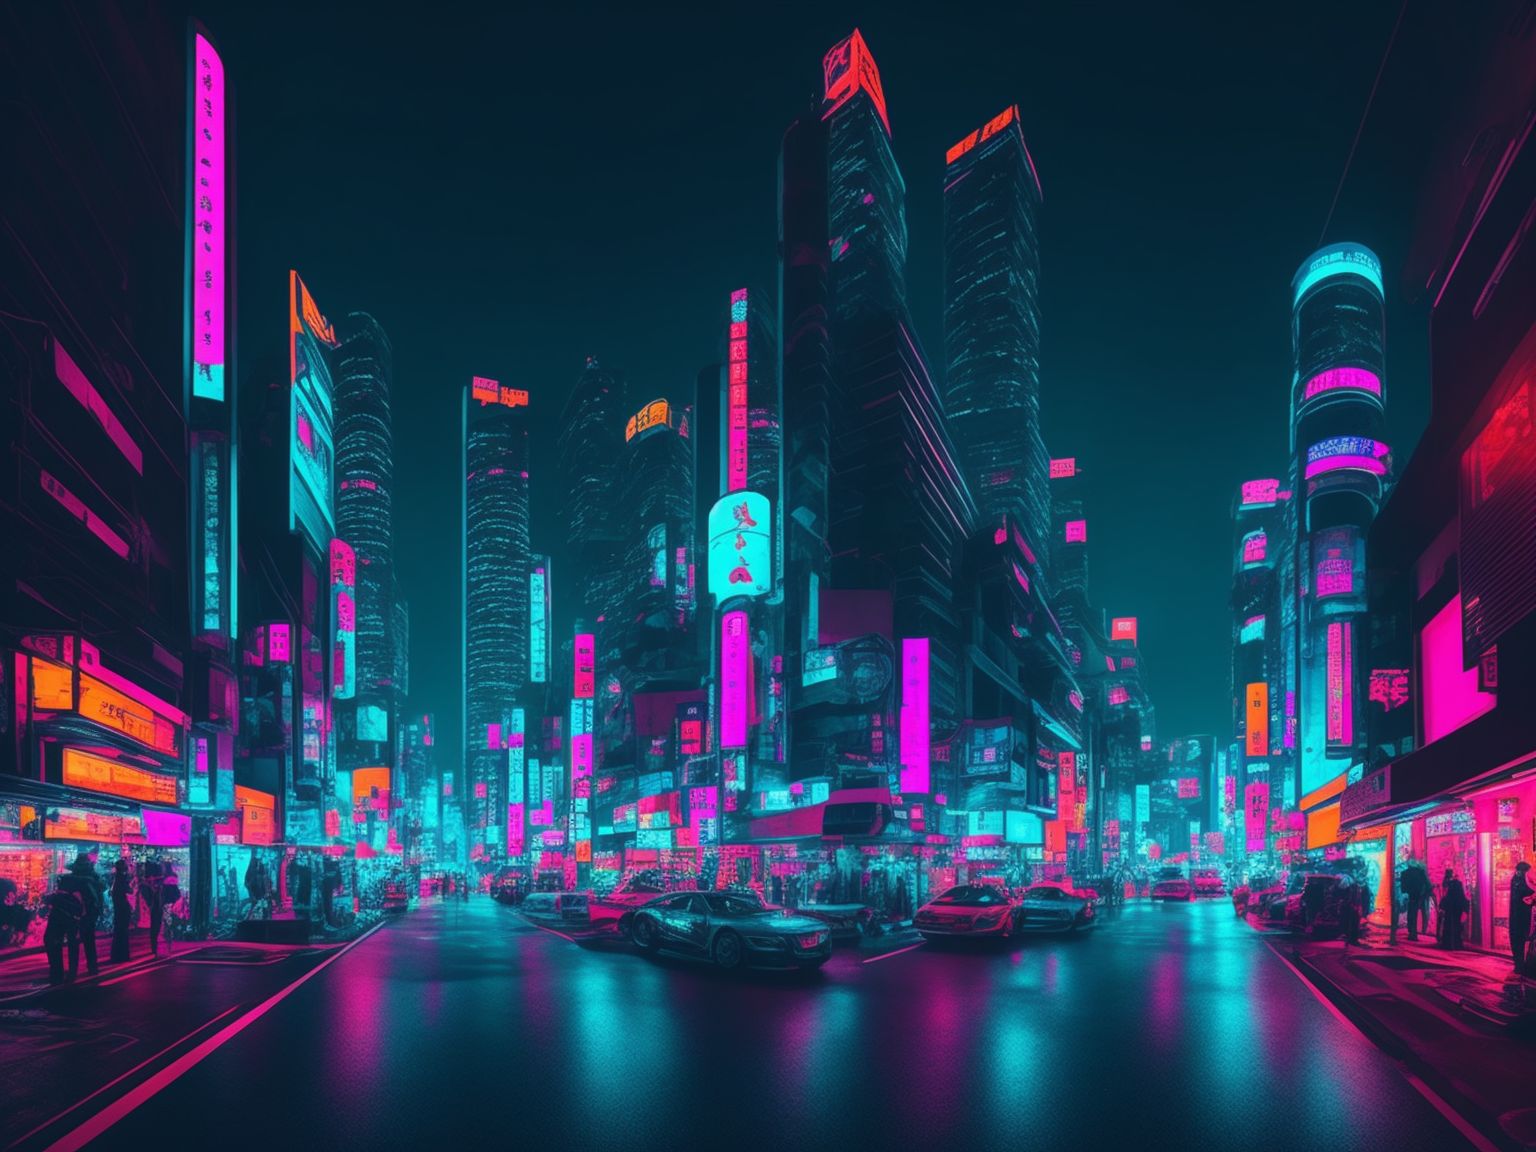 Japanese style city street , neon cityscape, the artwork should be highly detailed, Intricate, and smooth, with a dark, cyberpunk style, the lighting should be vivid, with neon colors illuminating the city, the artwork should be created using stable diffusion, and should be trending on artstation. art inspiration should come from artists like simon stålenhag, maciej kuciara, and tariq raheem.